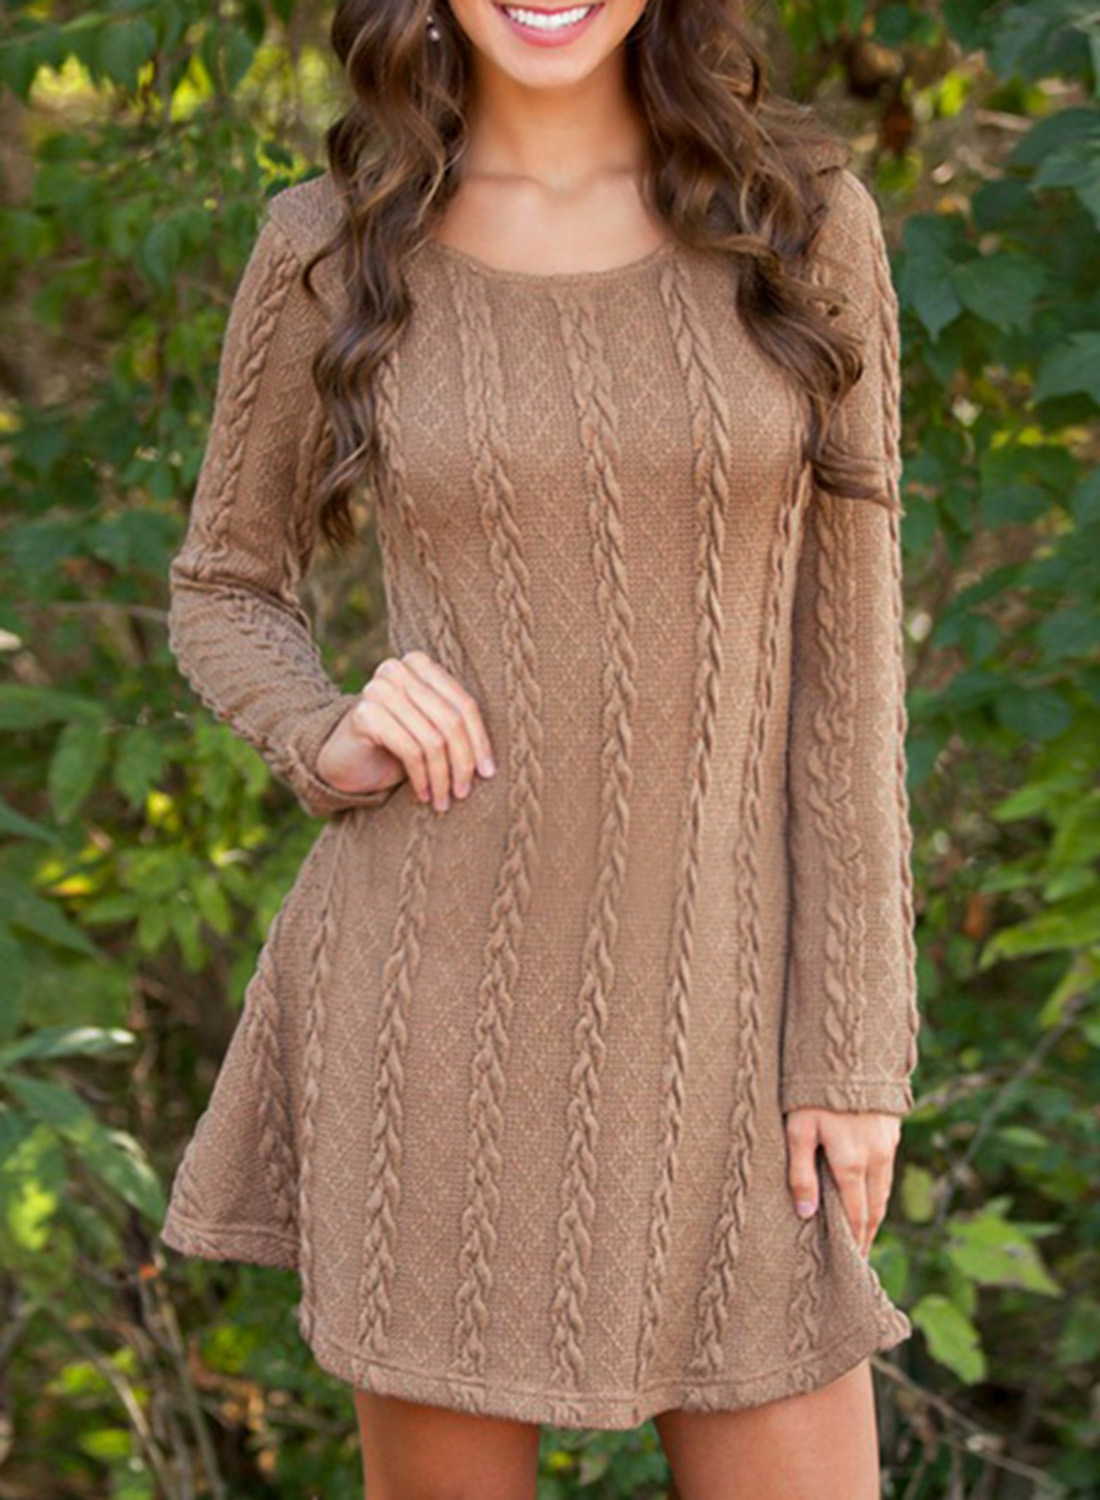 Simple Cable Knit Round Neck Sweater Dress on Luulla